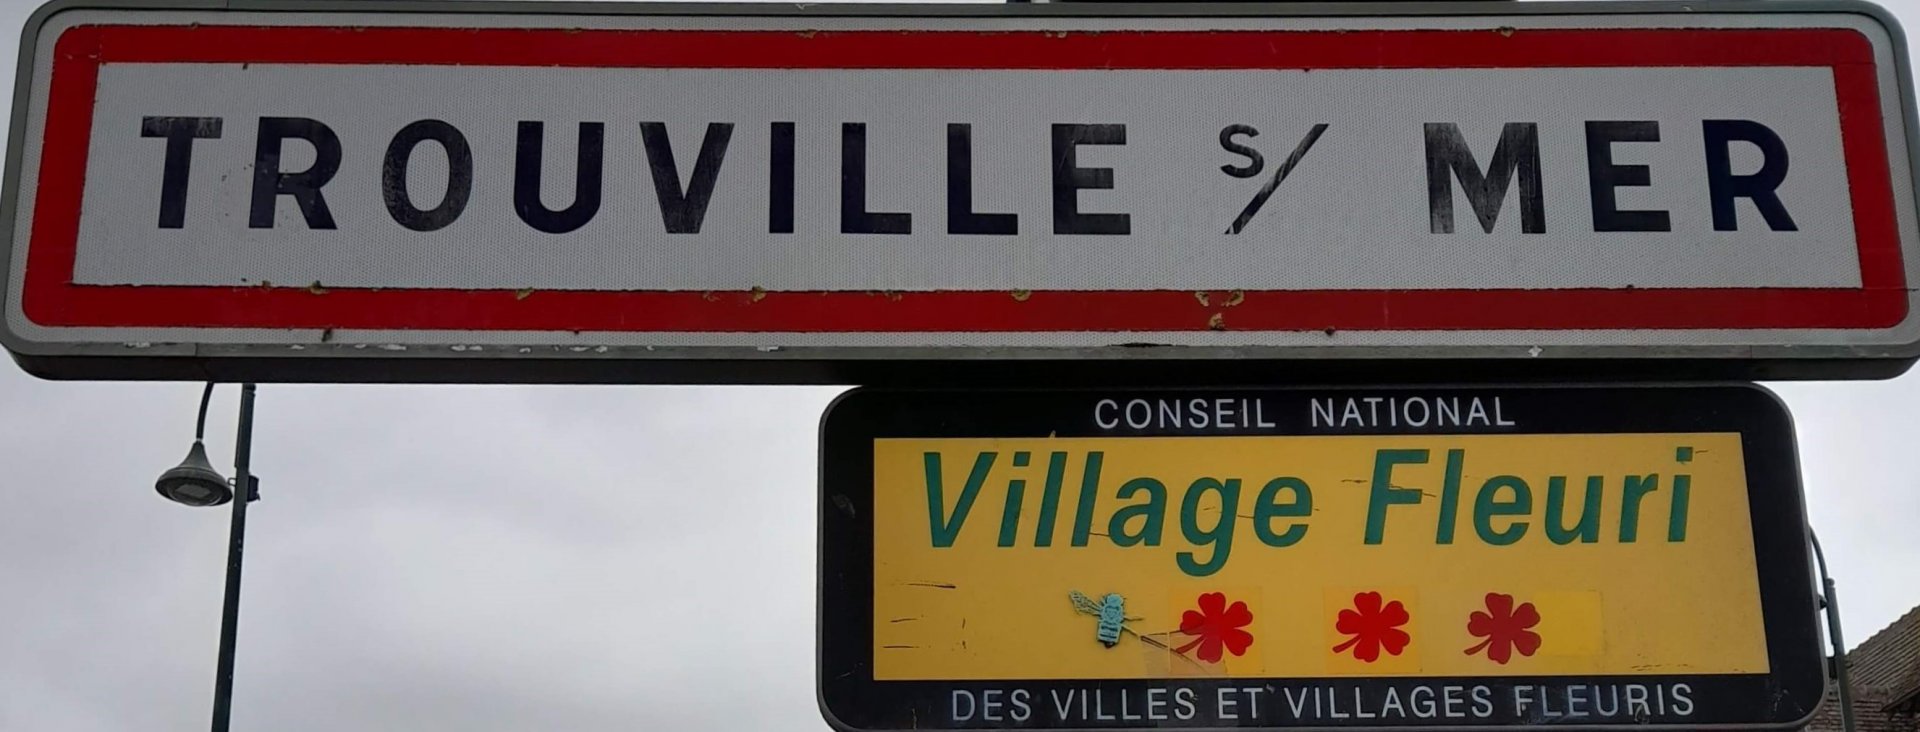 bessis-naming-trouville